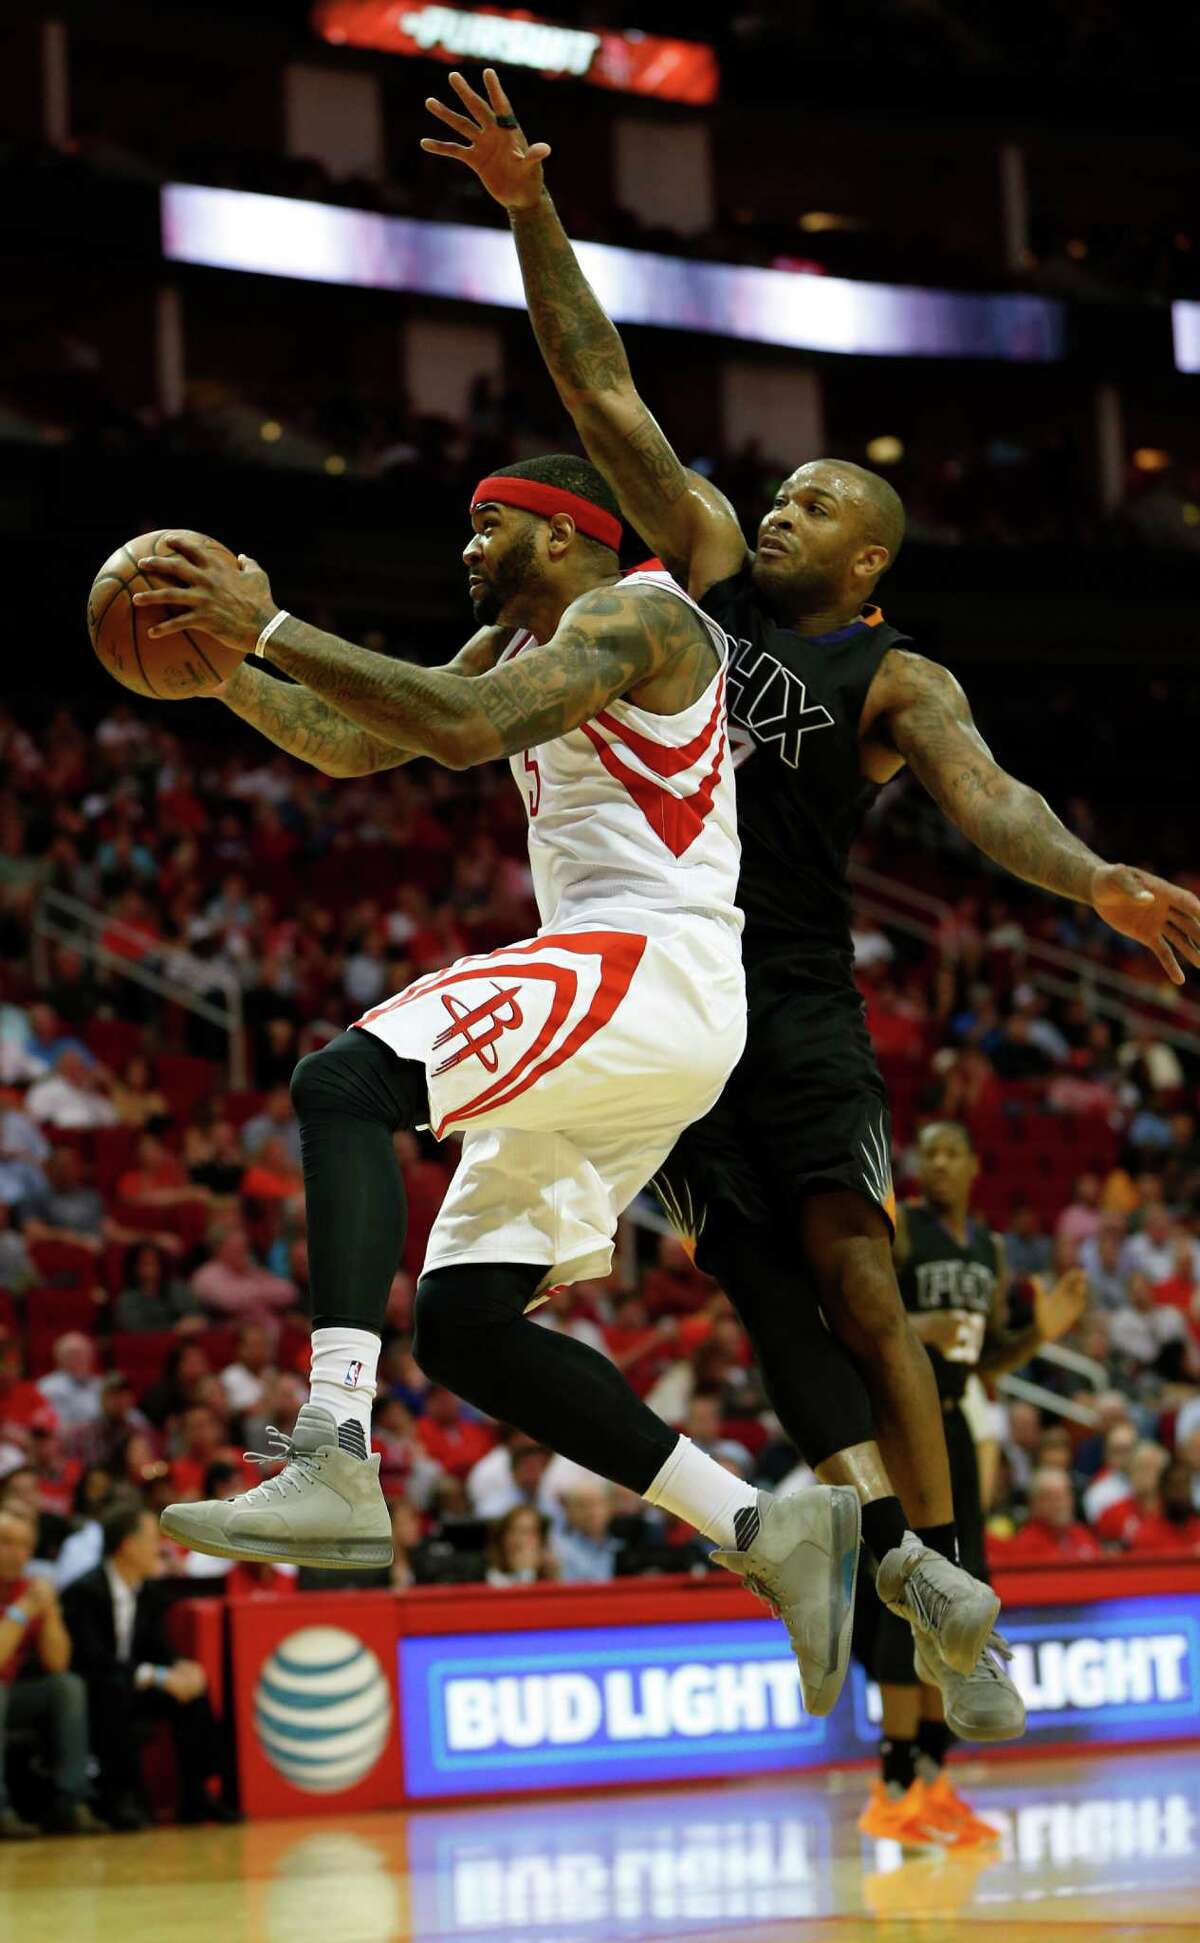 Houston Rockets center Josh Smith (5) goes up for a basket against Phoenix Suns forward P.J. Tucker (17) during the second half of an NBA basketball game at Toyota Center, Thursday, April 7, 2016, in Houston. Rockets lost to Phoenix 124-115.